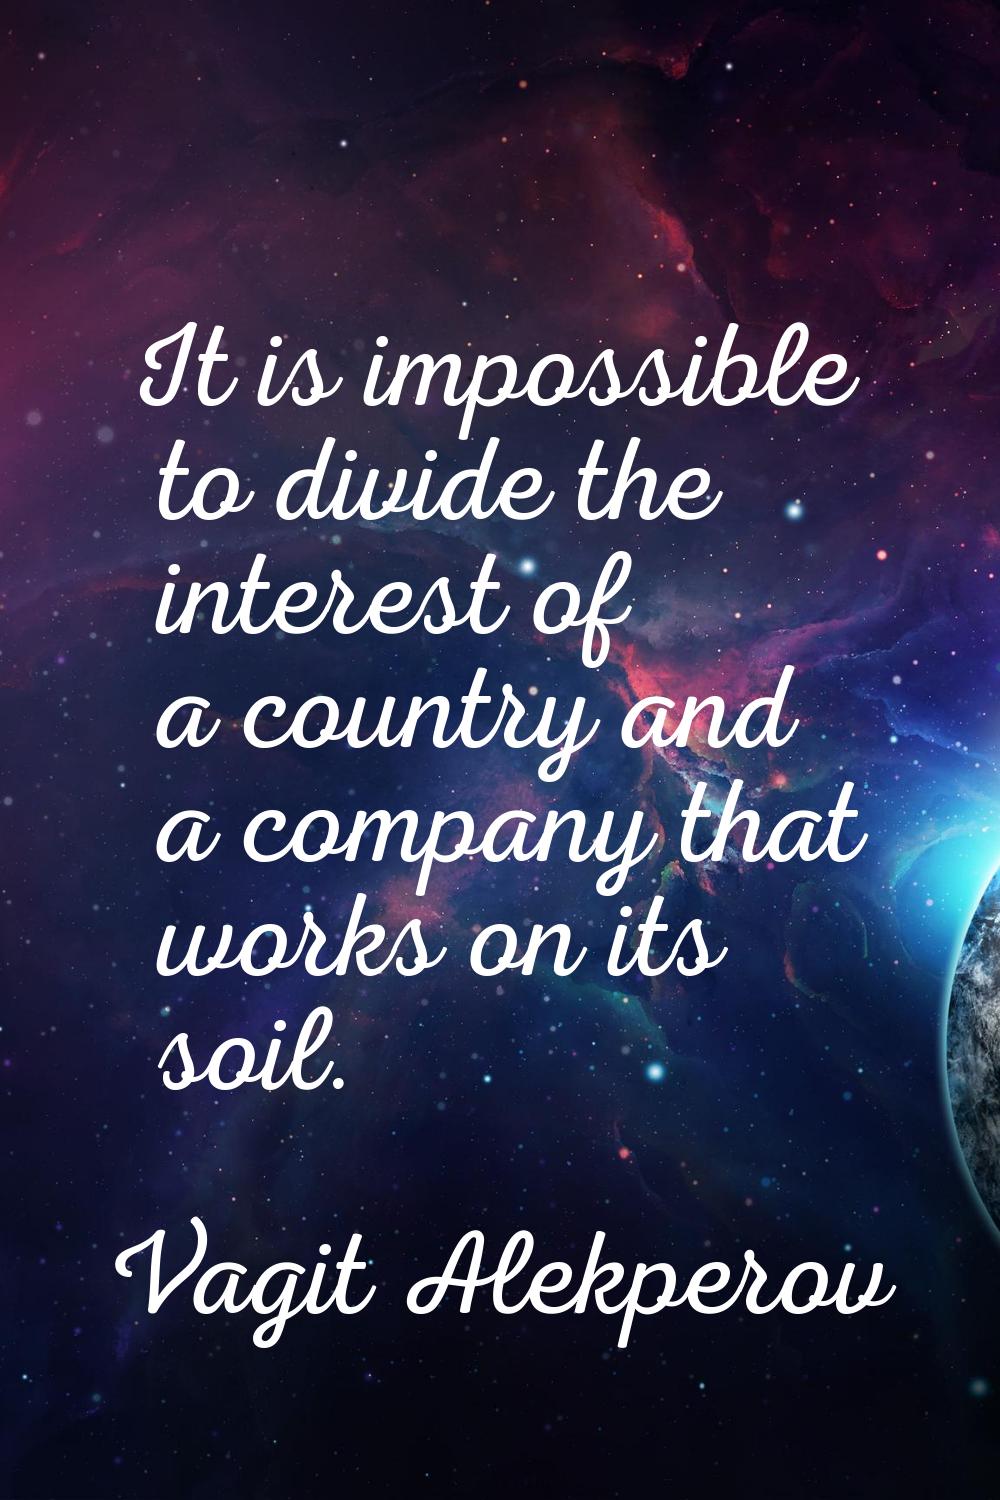 It is impossible to divide the interest of a country and a company that works on its soil.